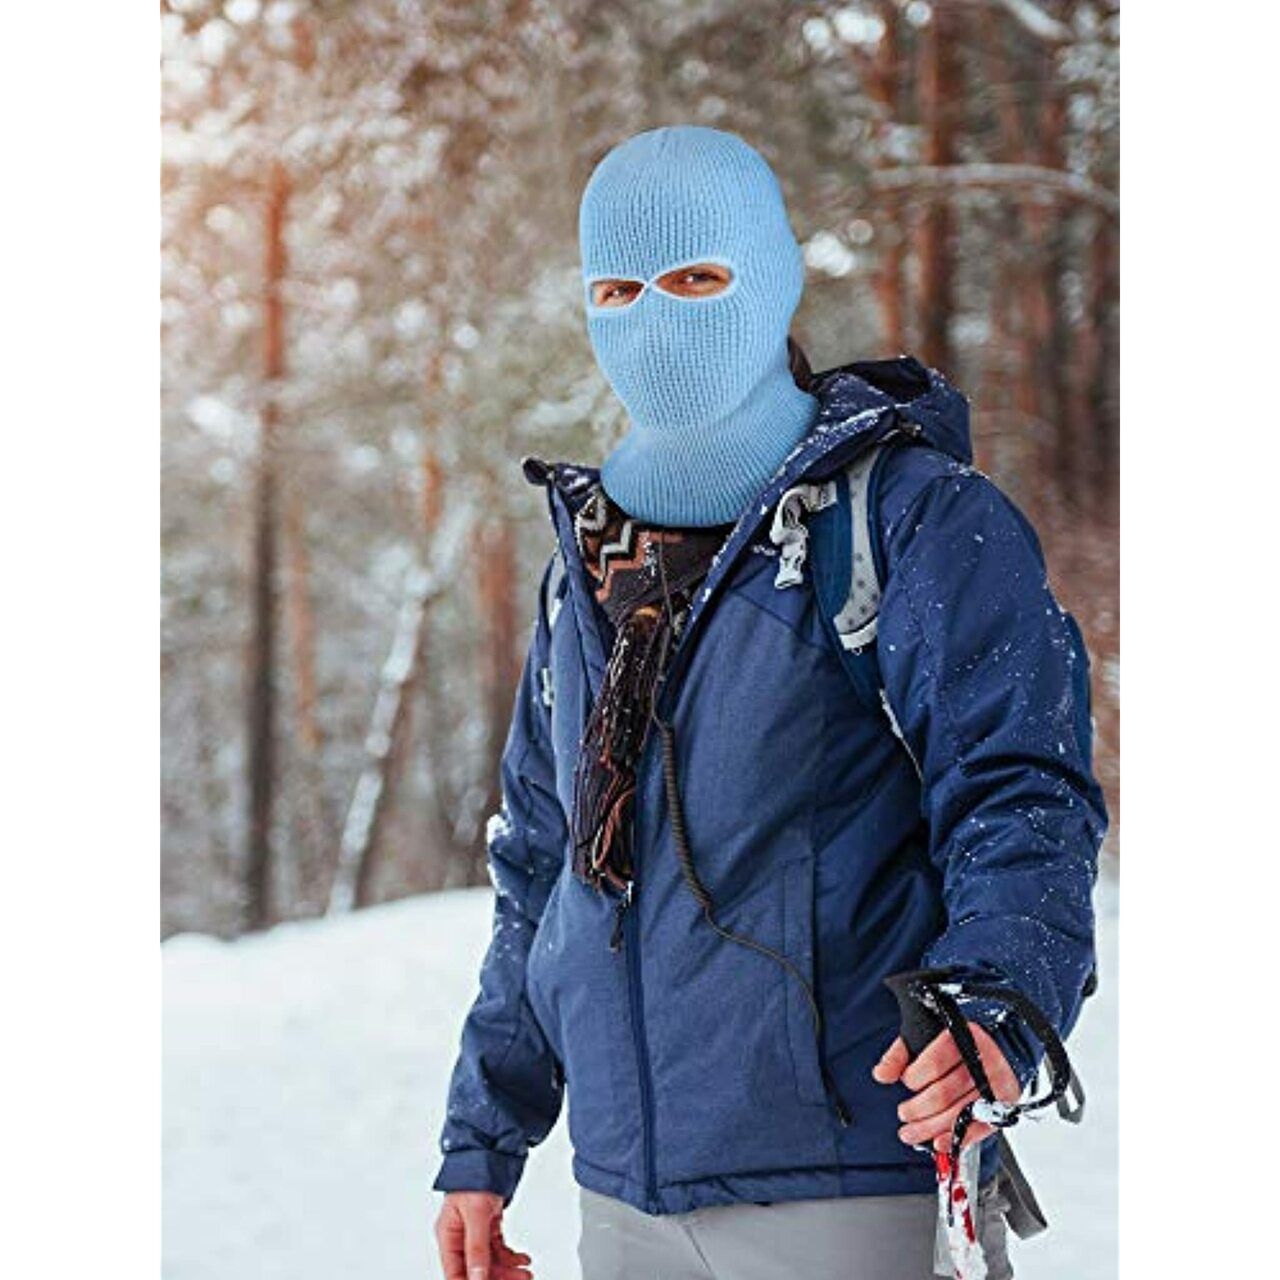 2 Hole Knitted Full Face Cover Ski Mask, Adult Winter Balaclava Warm Knit Full Face Mask For Outdoor Sports